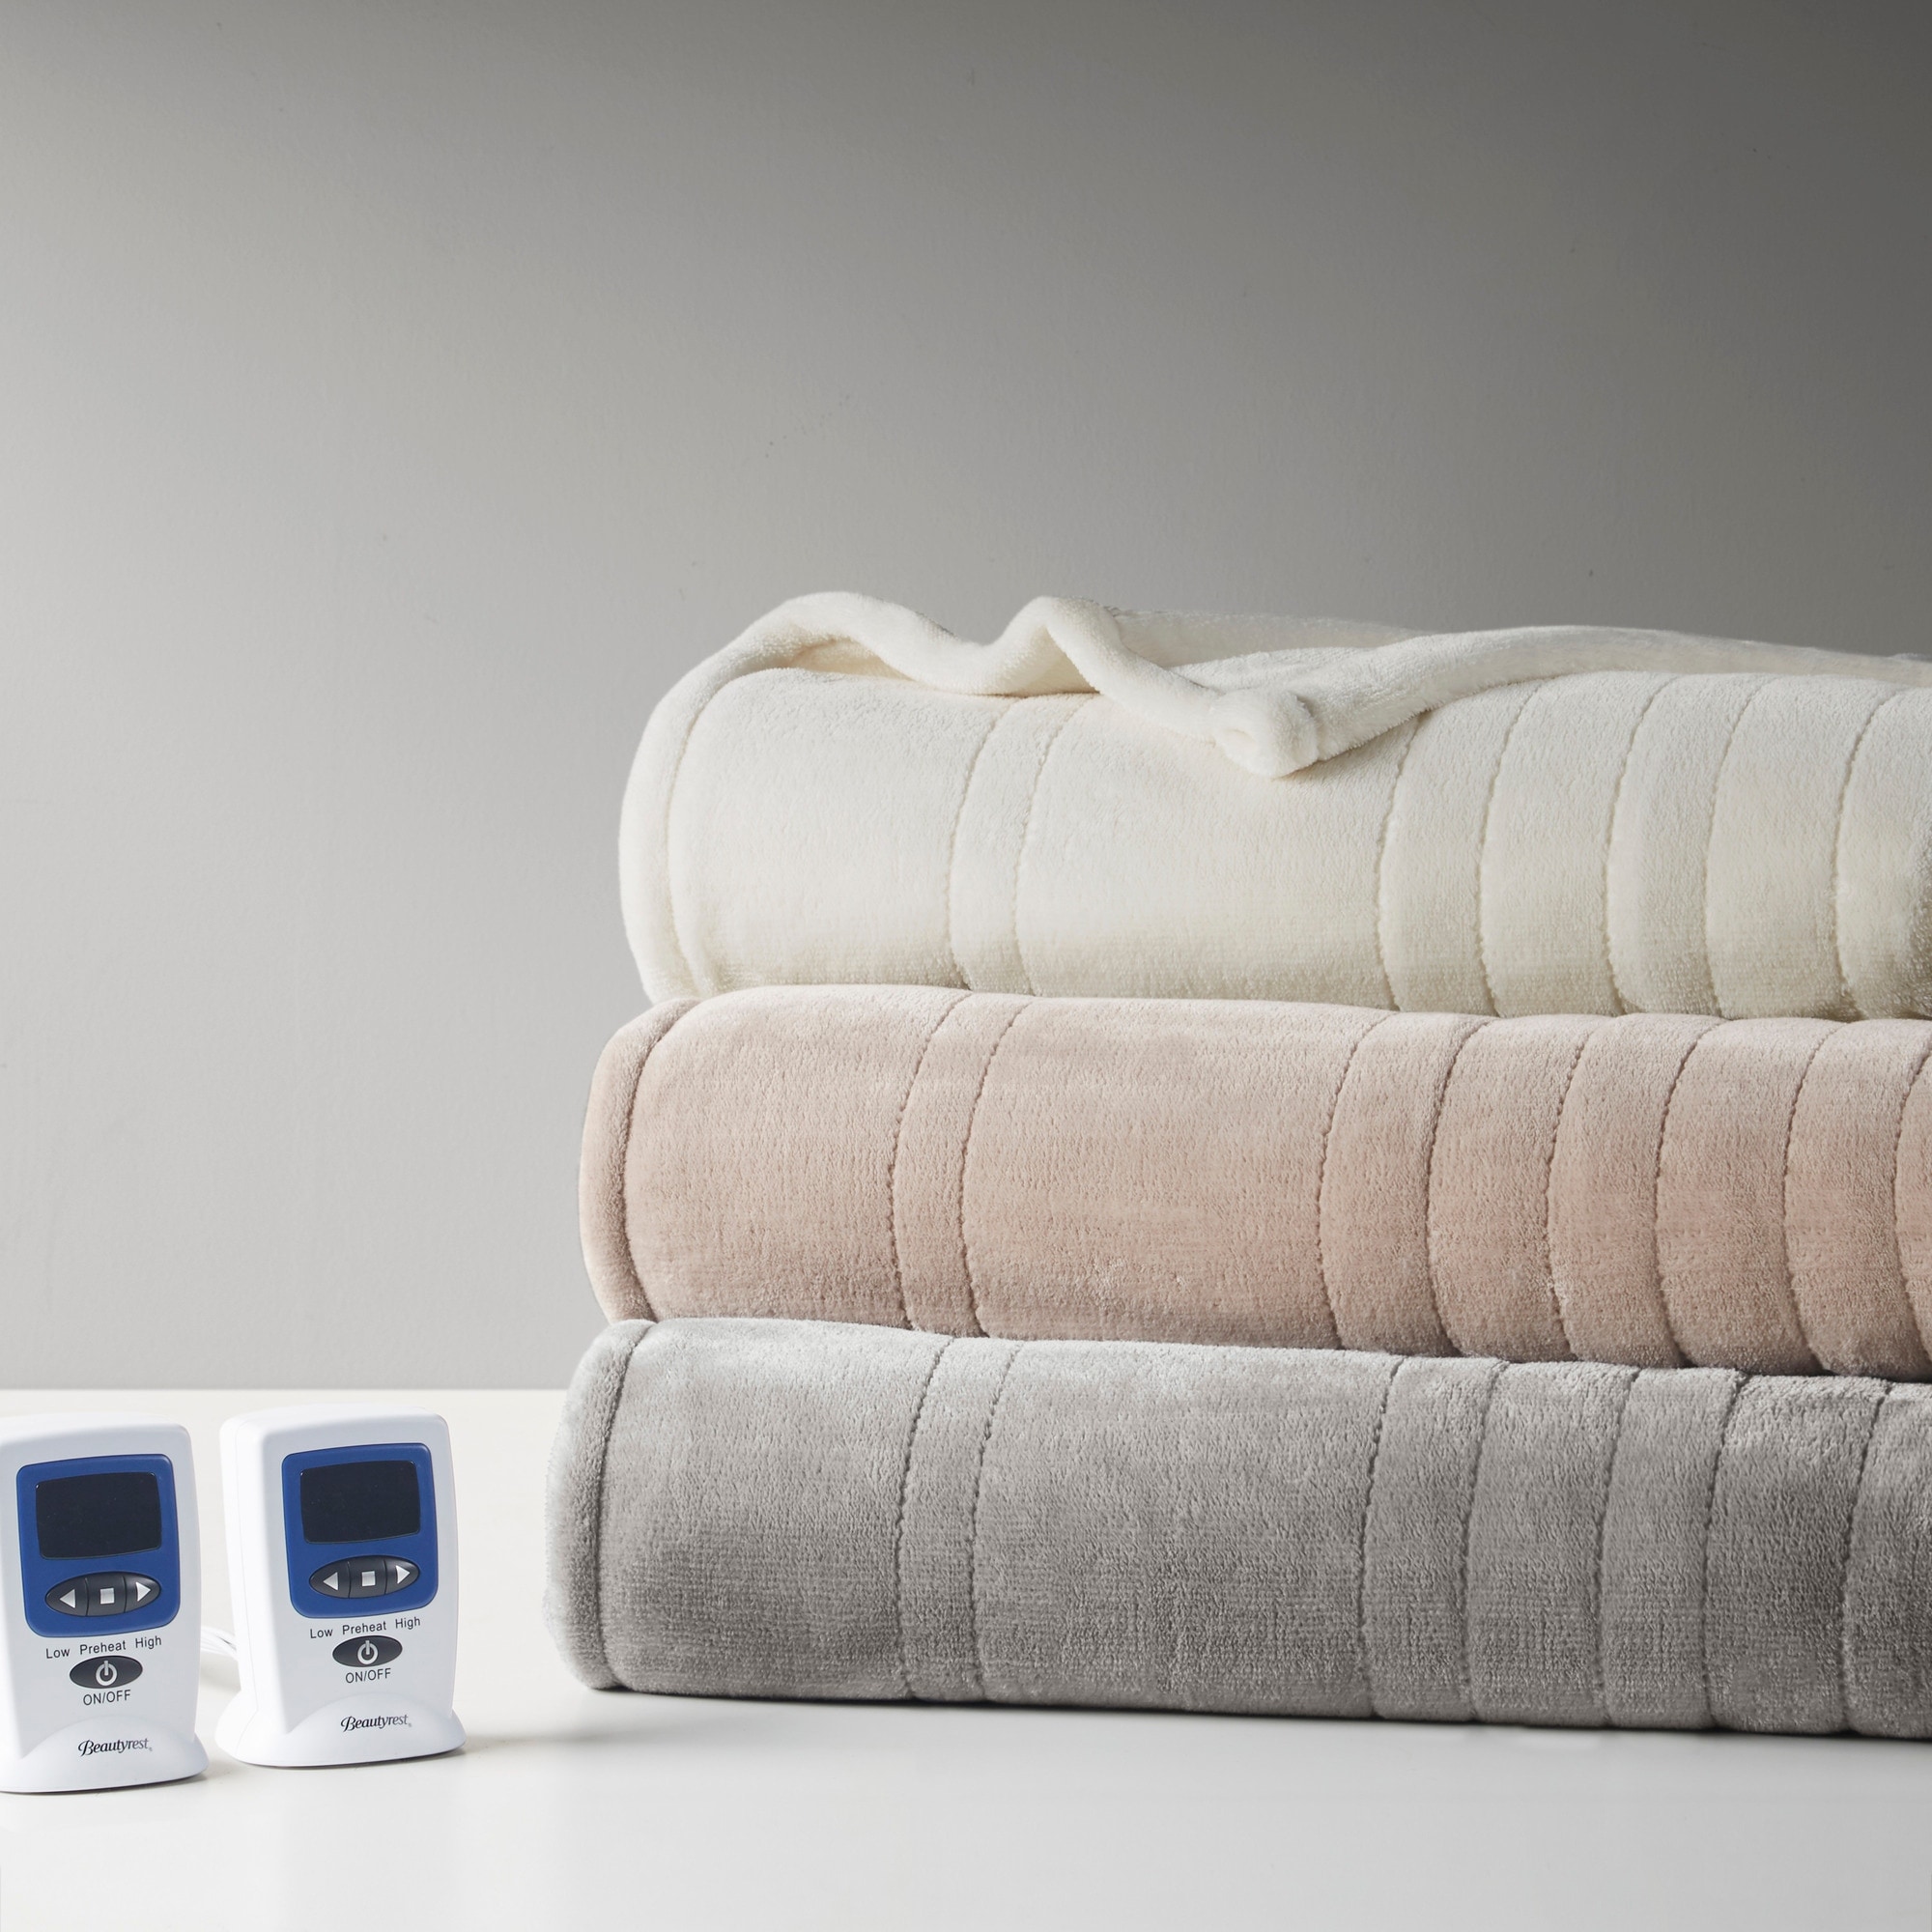 https://ak1.ostkcdn.com/images/products/is/images/direct/430d0ca72cd536ee46f4b44d7c923b199a5ed68f/Beautyrest-Microplush-Heated-Blanket-with-Wifi-Technology.jpg